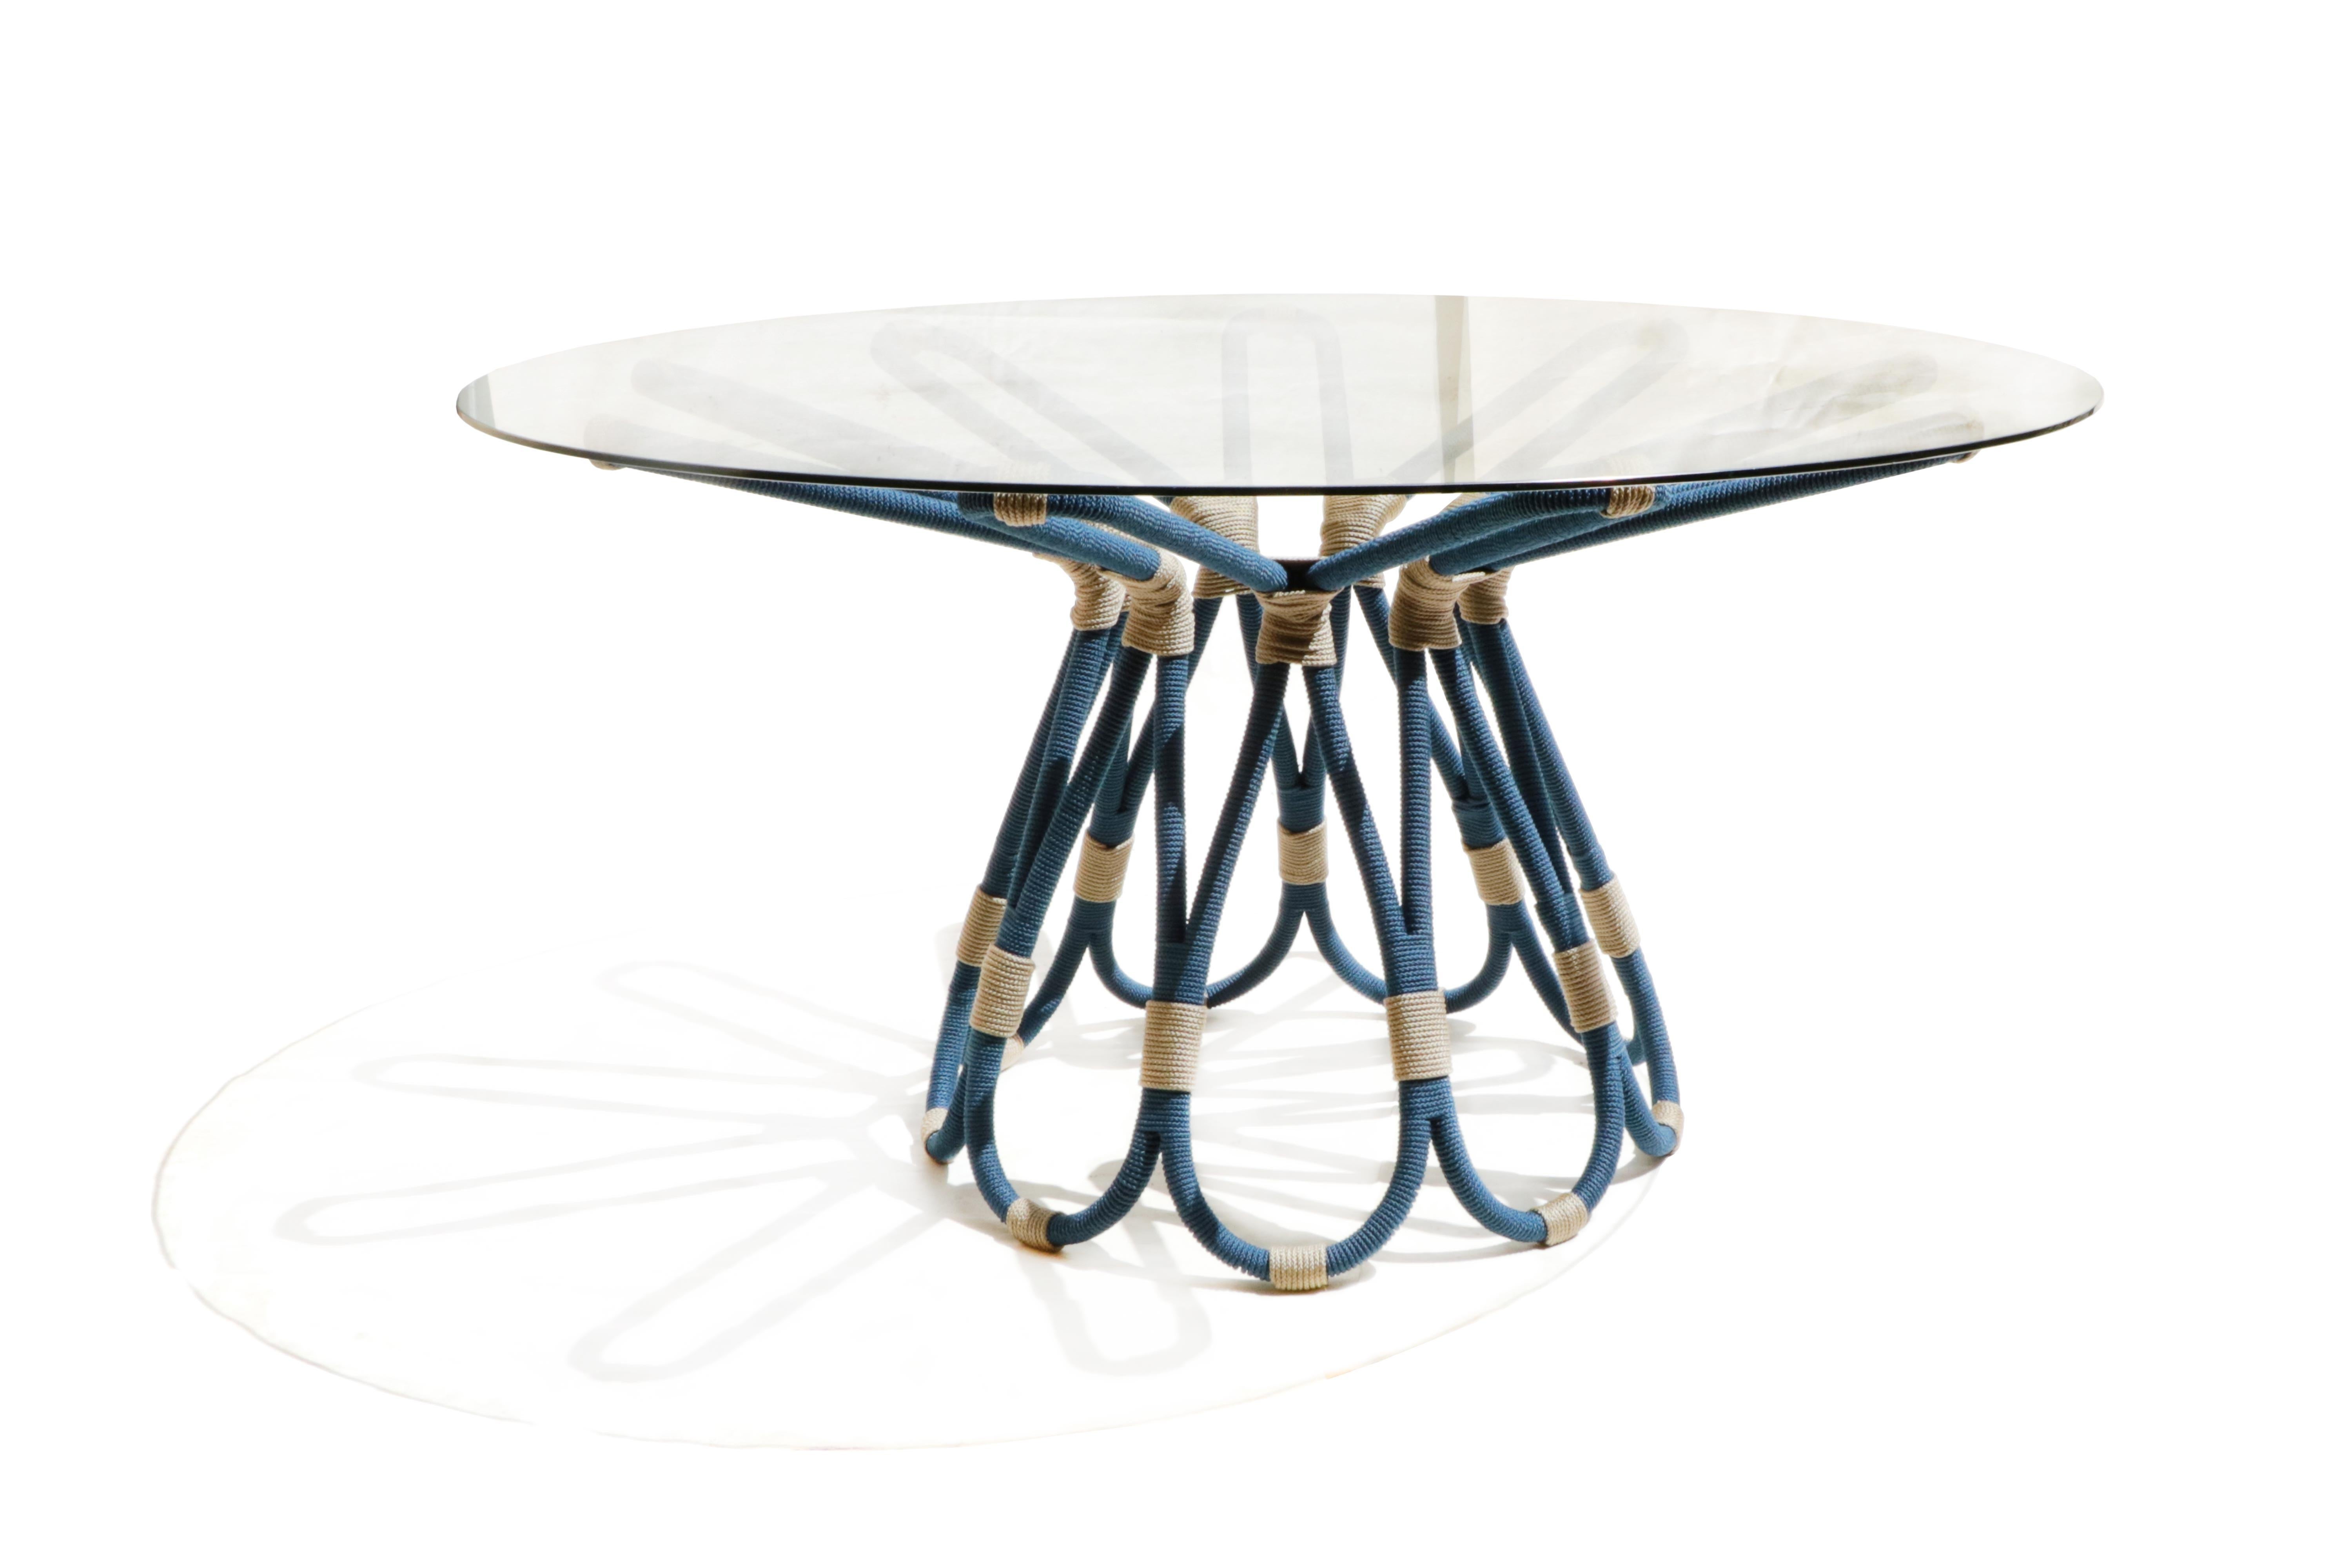 Tradition, culture, history and memory. Elements linked to the design of the Macramé Table to praise the inspiration in the manual weaving technique that comes from distant times and lands beyond the sea. Forged in stainless steel, the structural